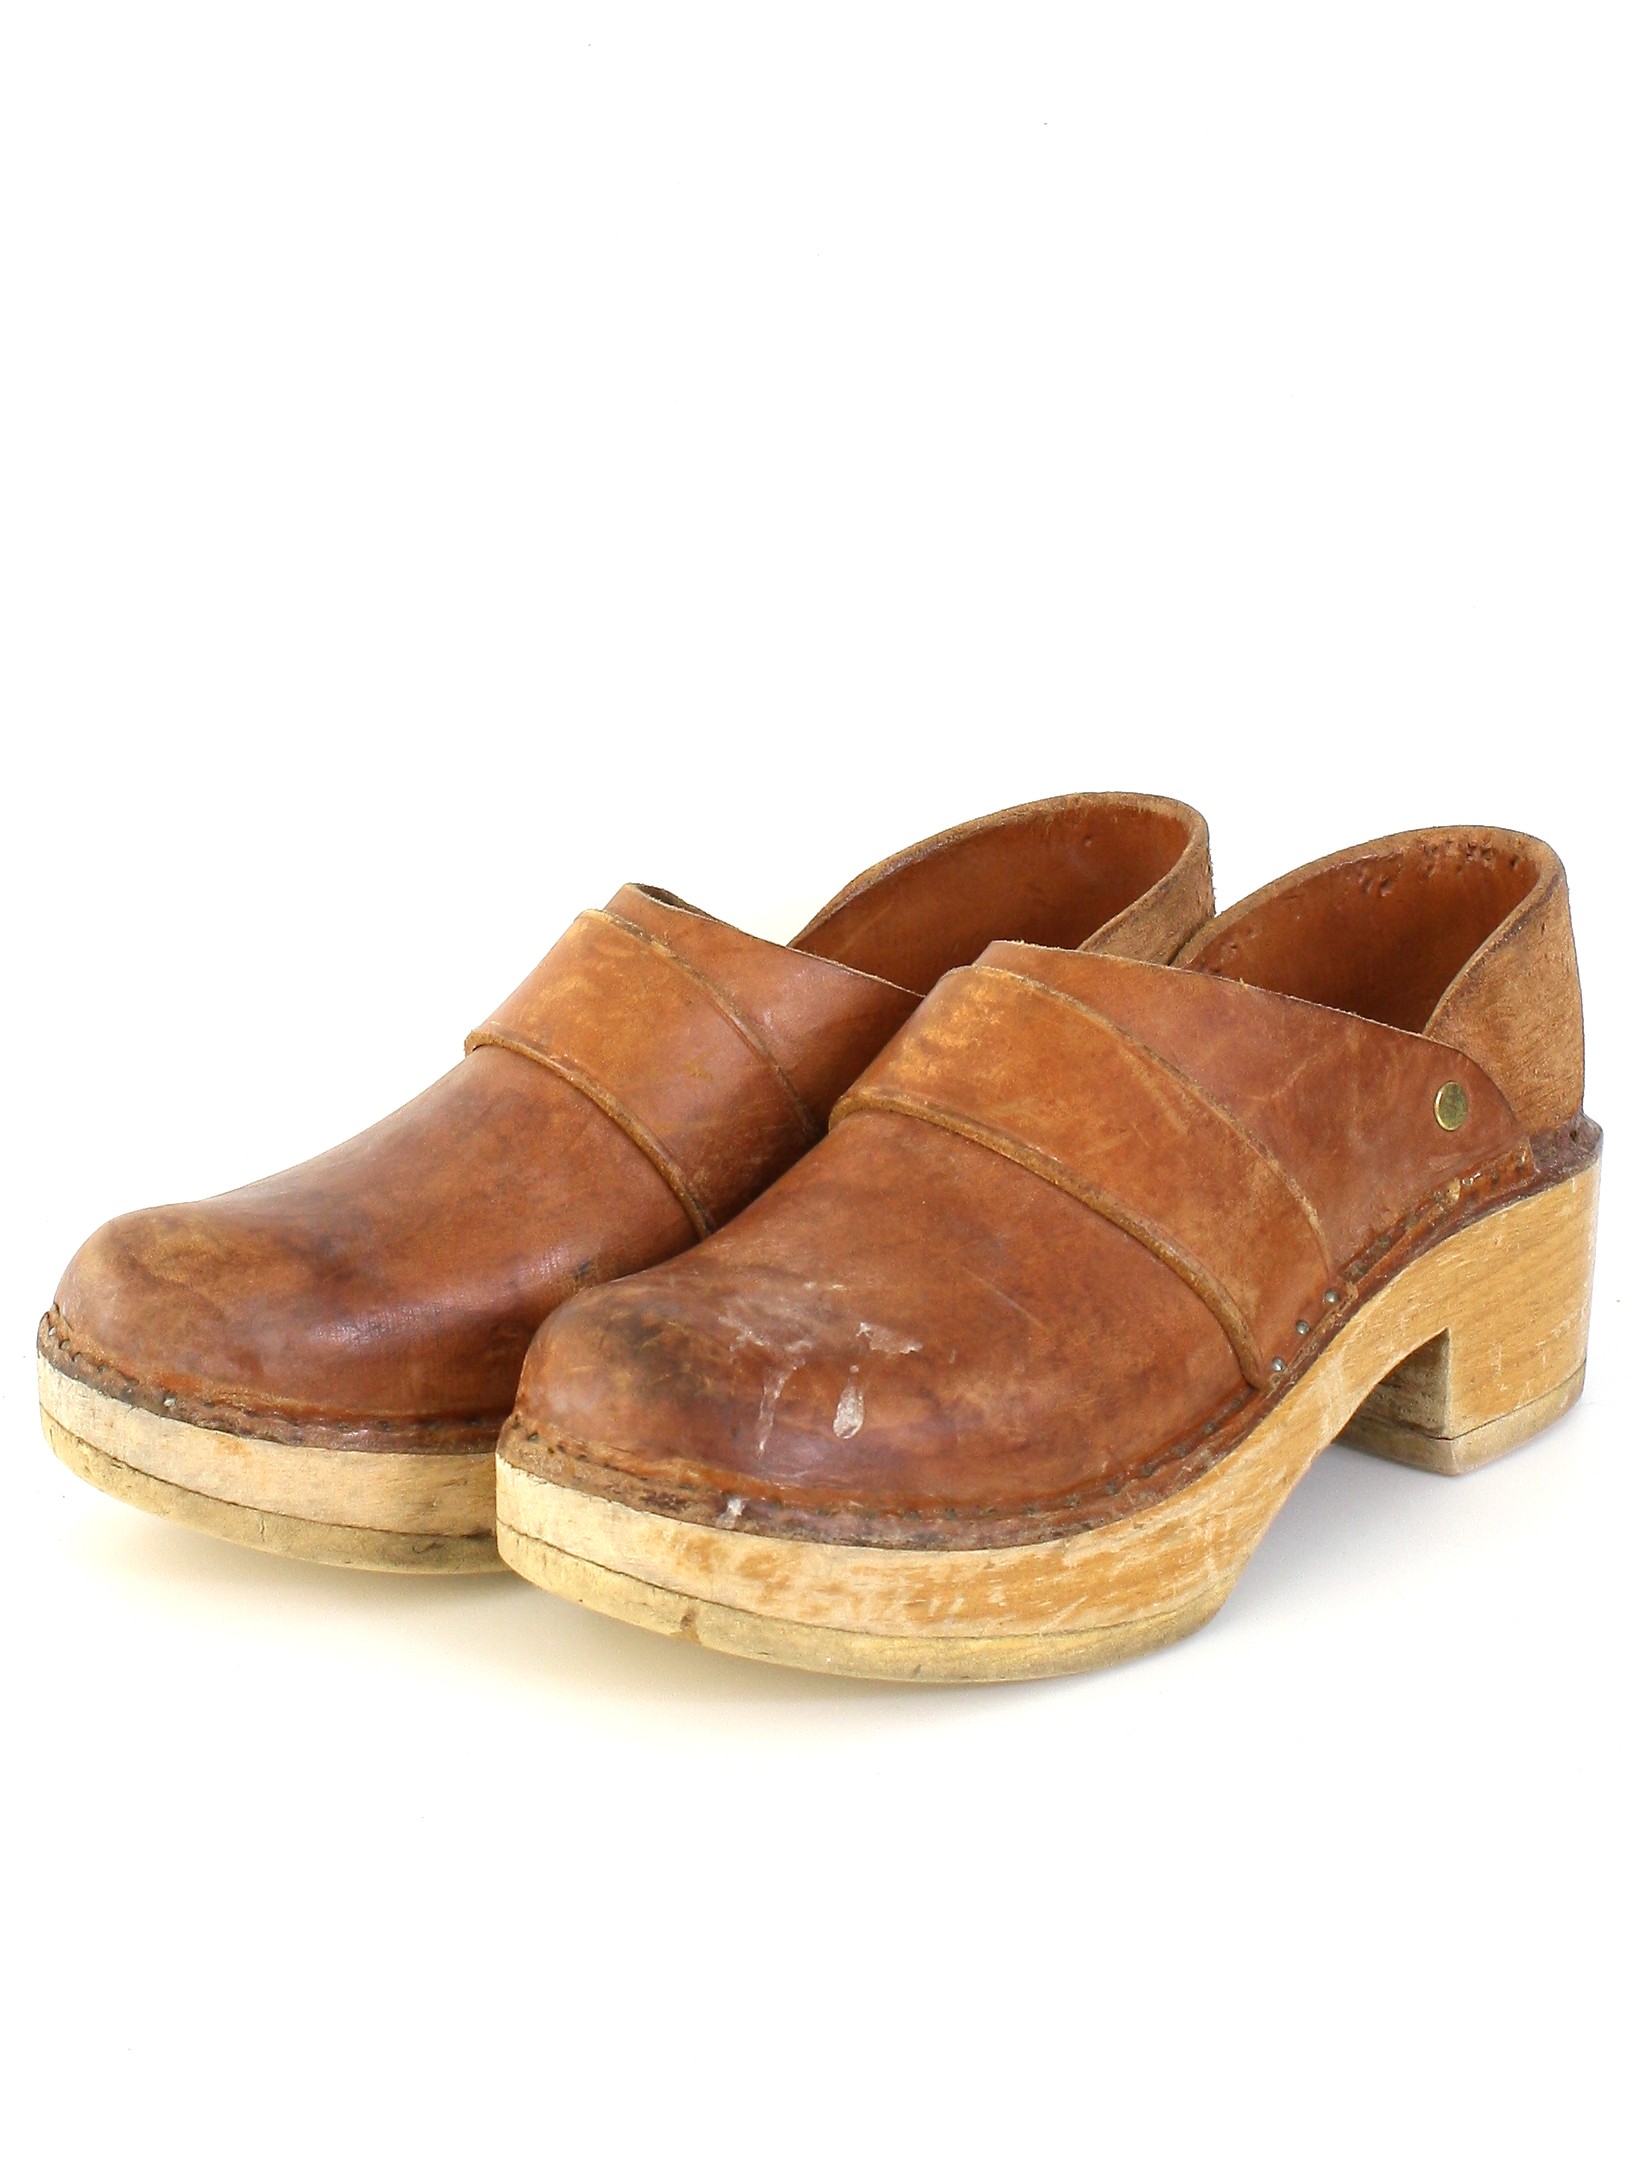 brown clog shoes